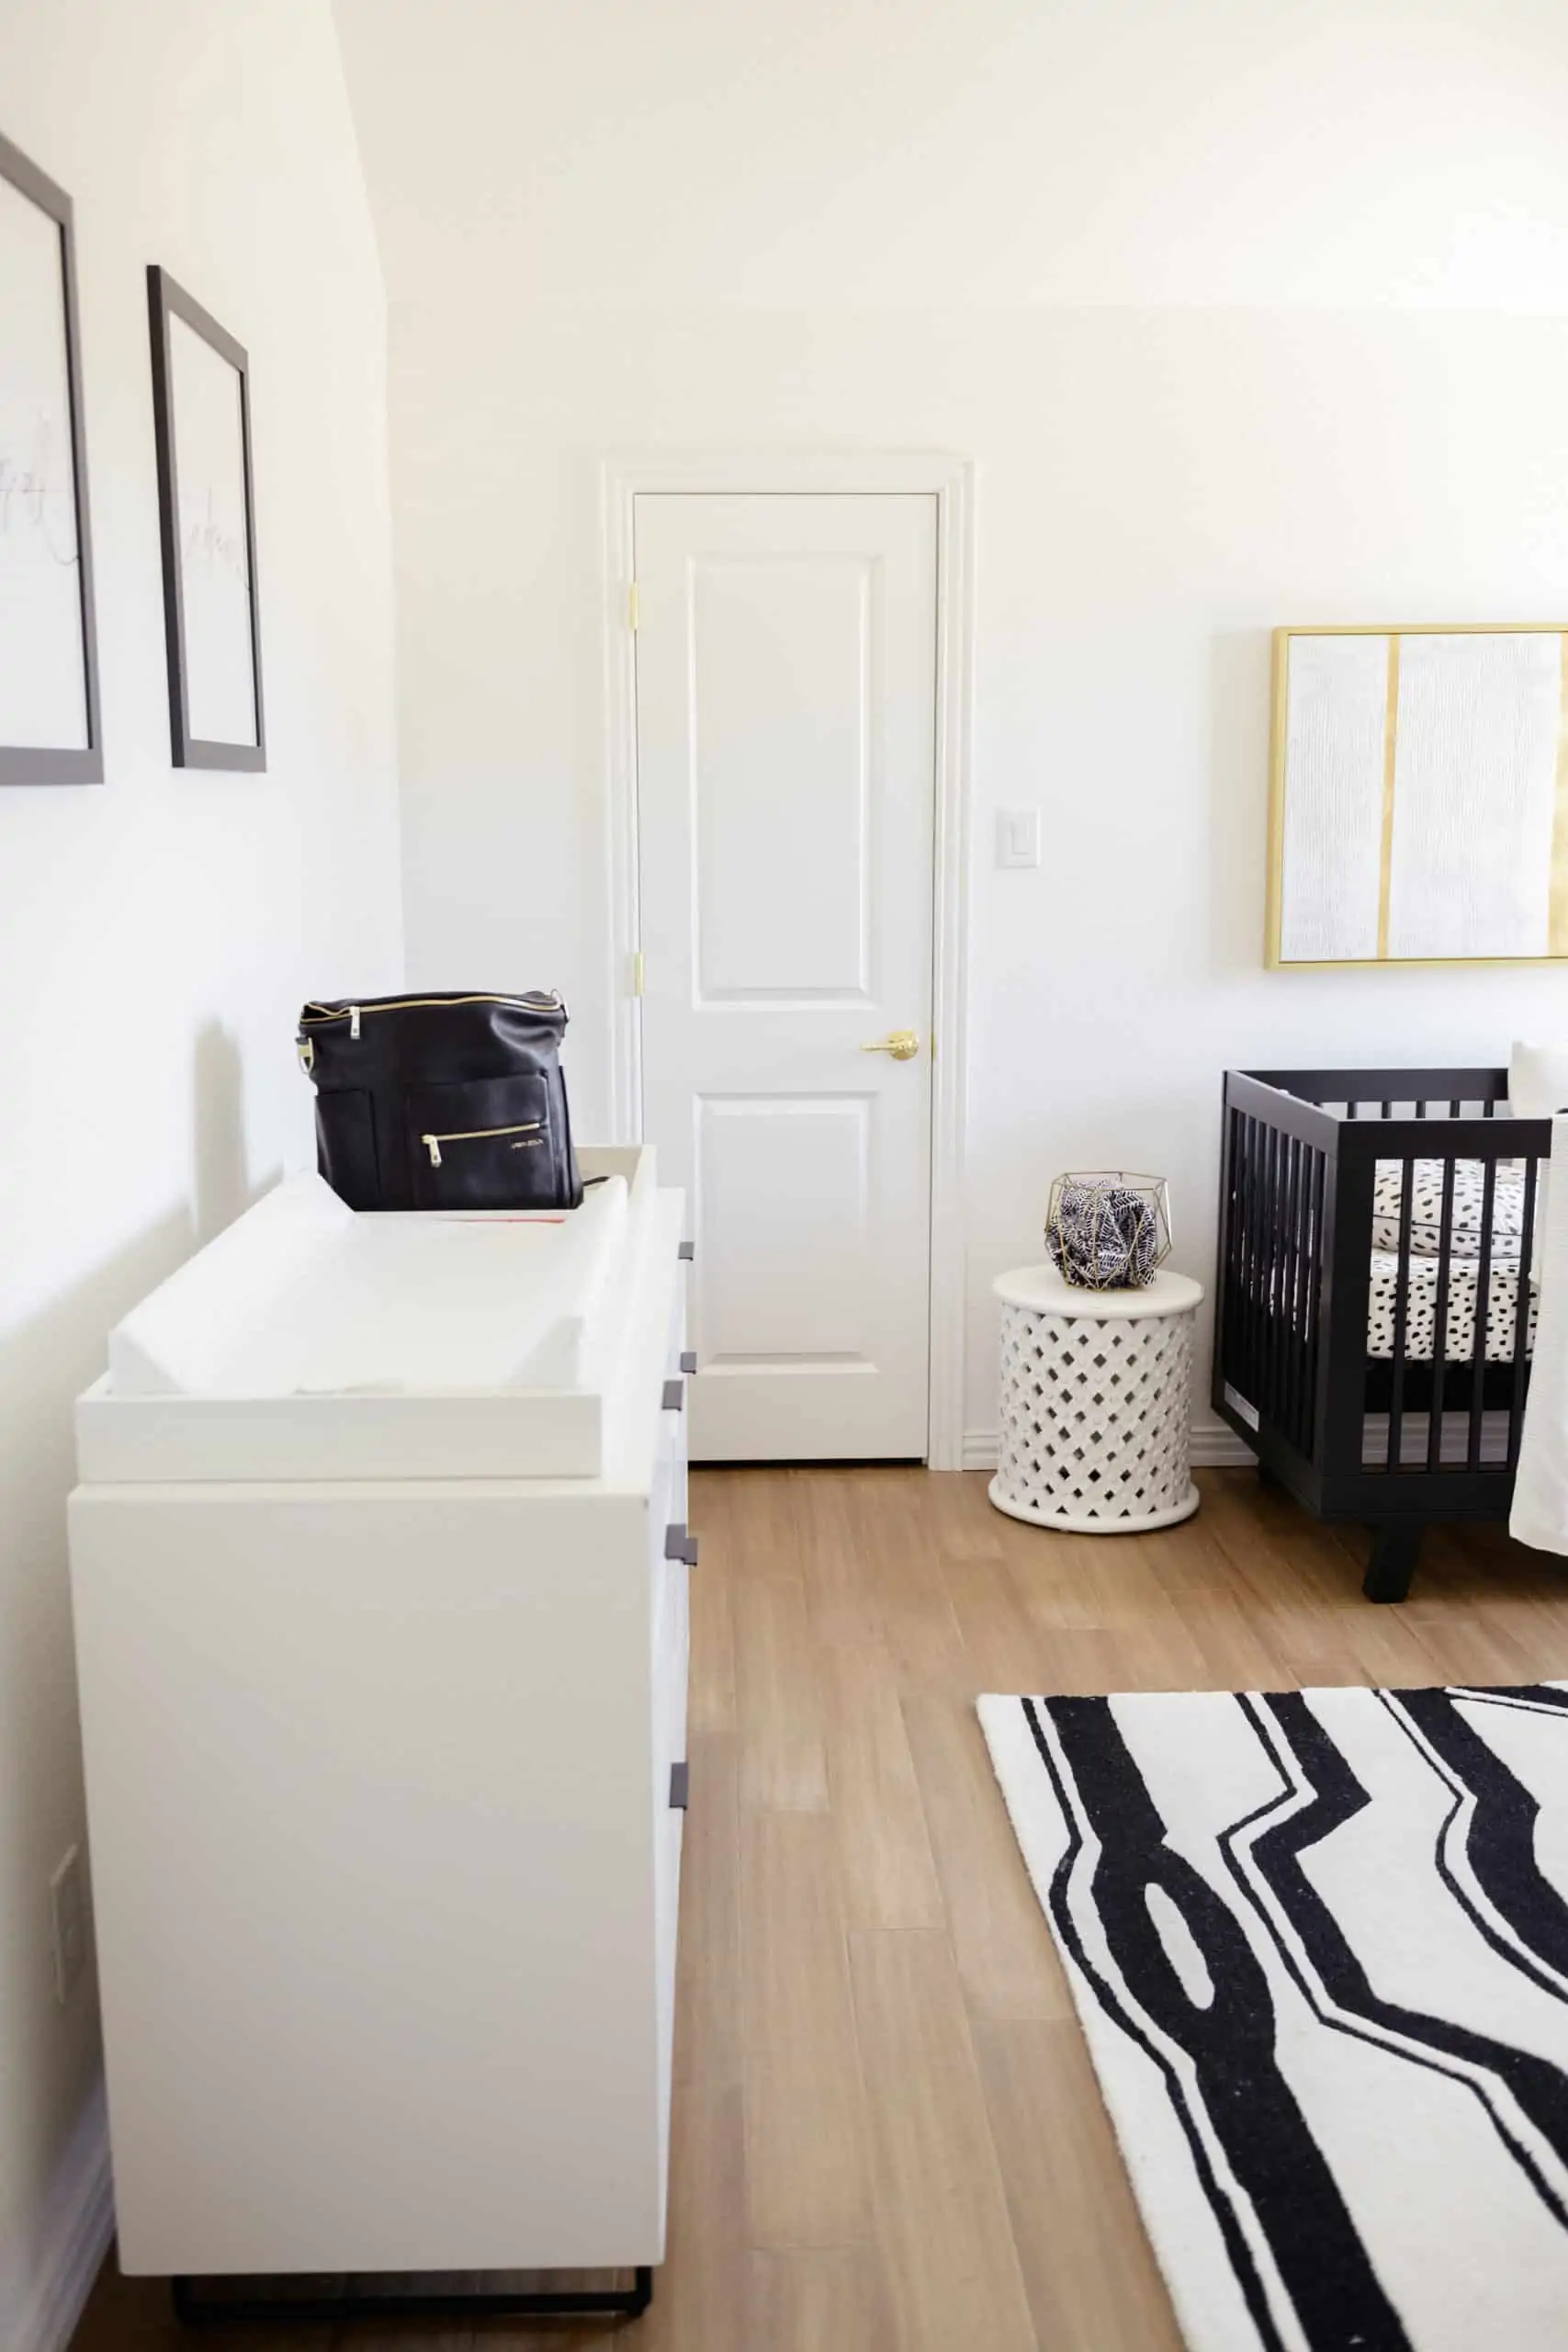 Wood Floor Installation by popular Dallas life and style blog, Glamorous Versatility: image of a boys room with light wood floors, black light fixture, black crib, black and white rug, white dresser, and white glider chair. 